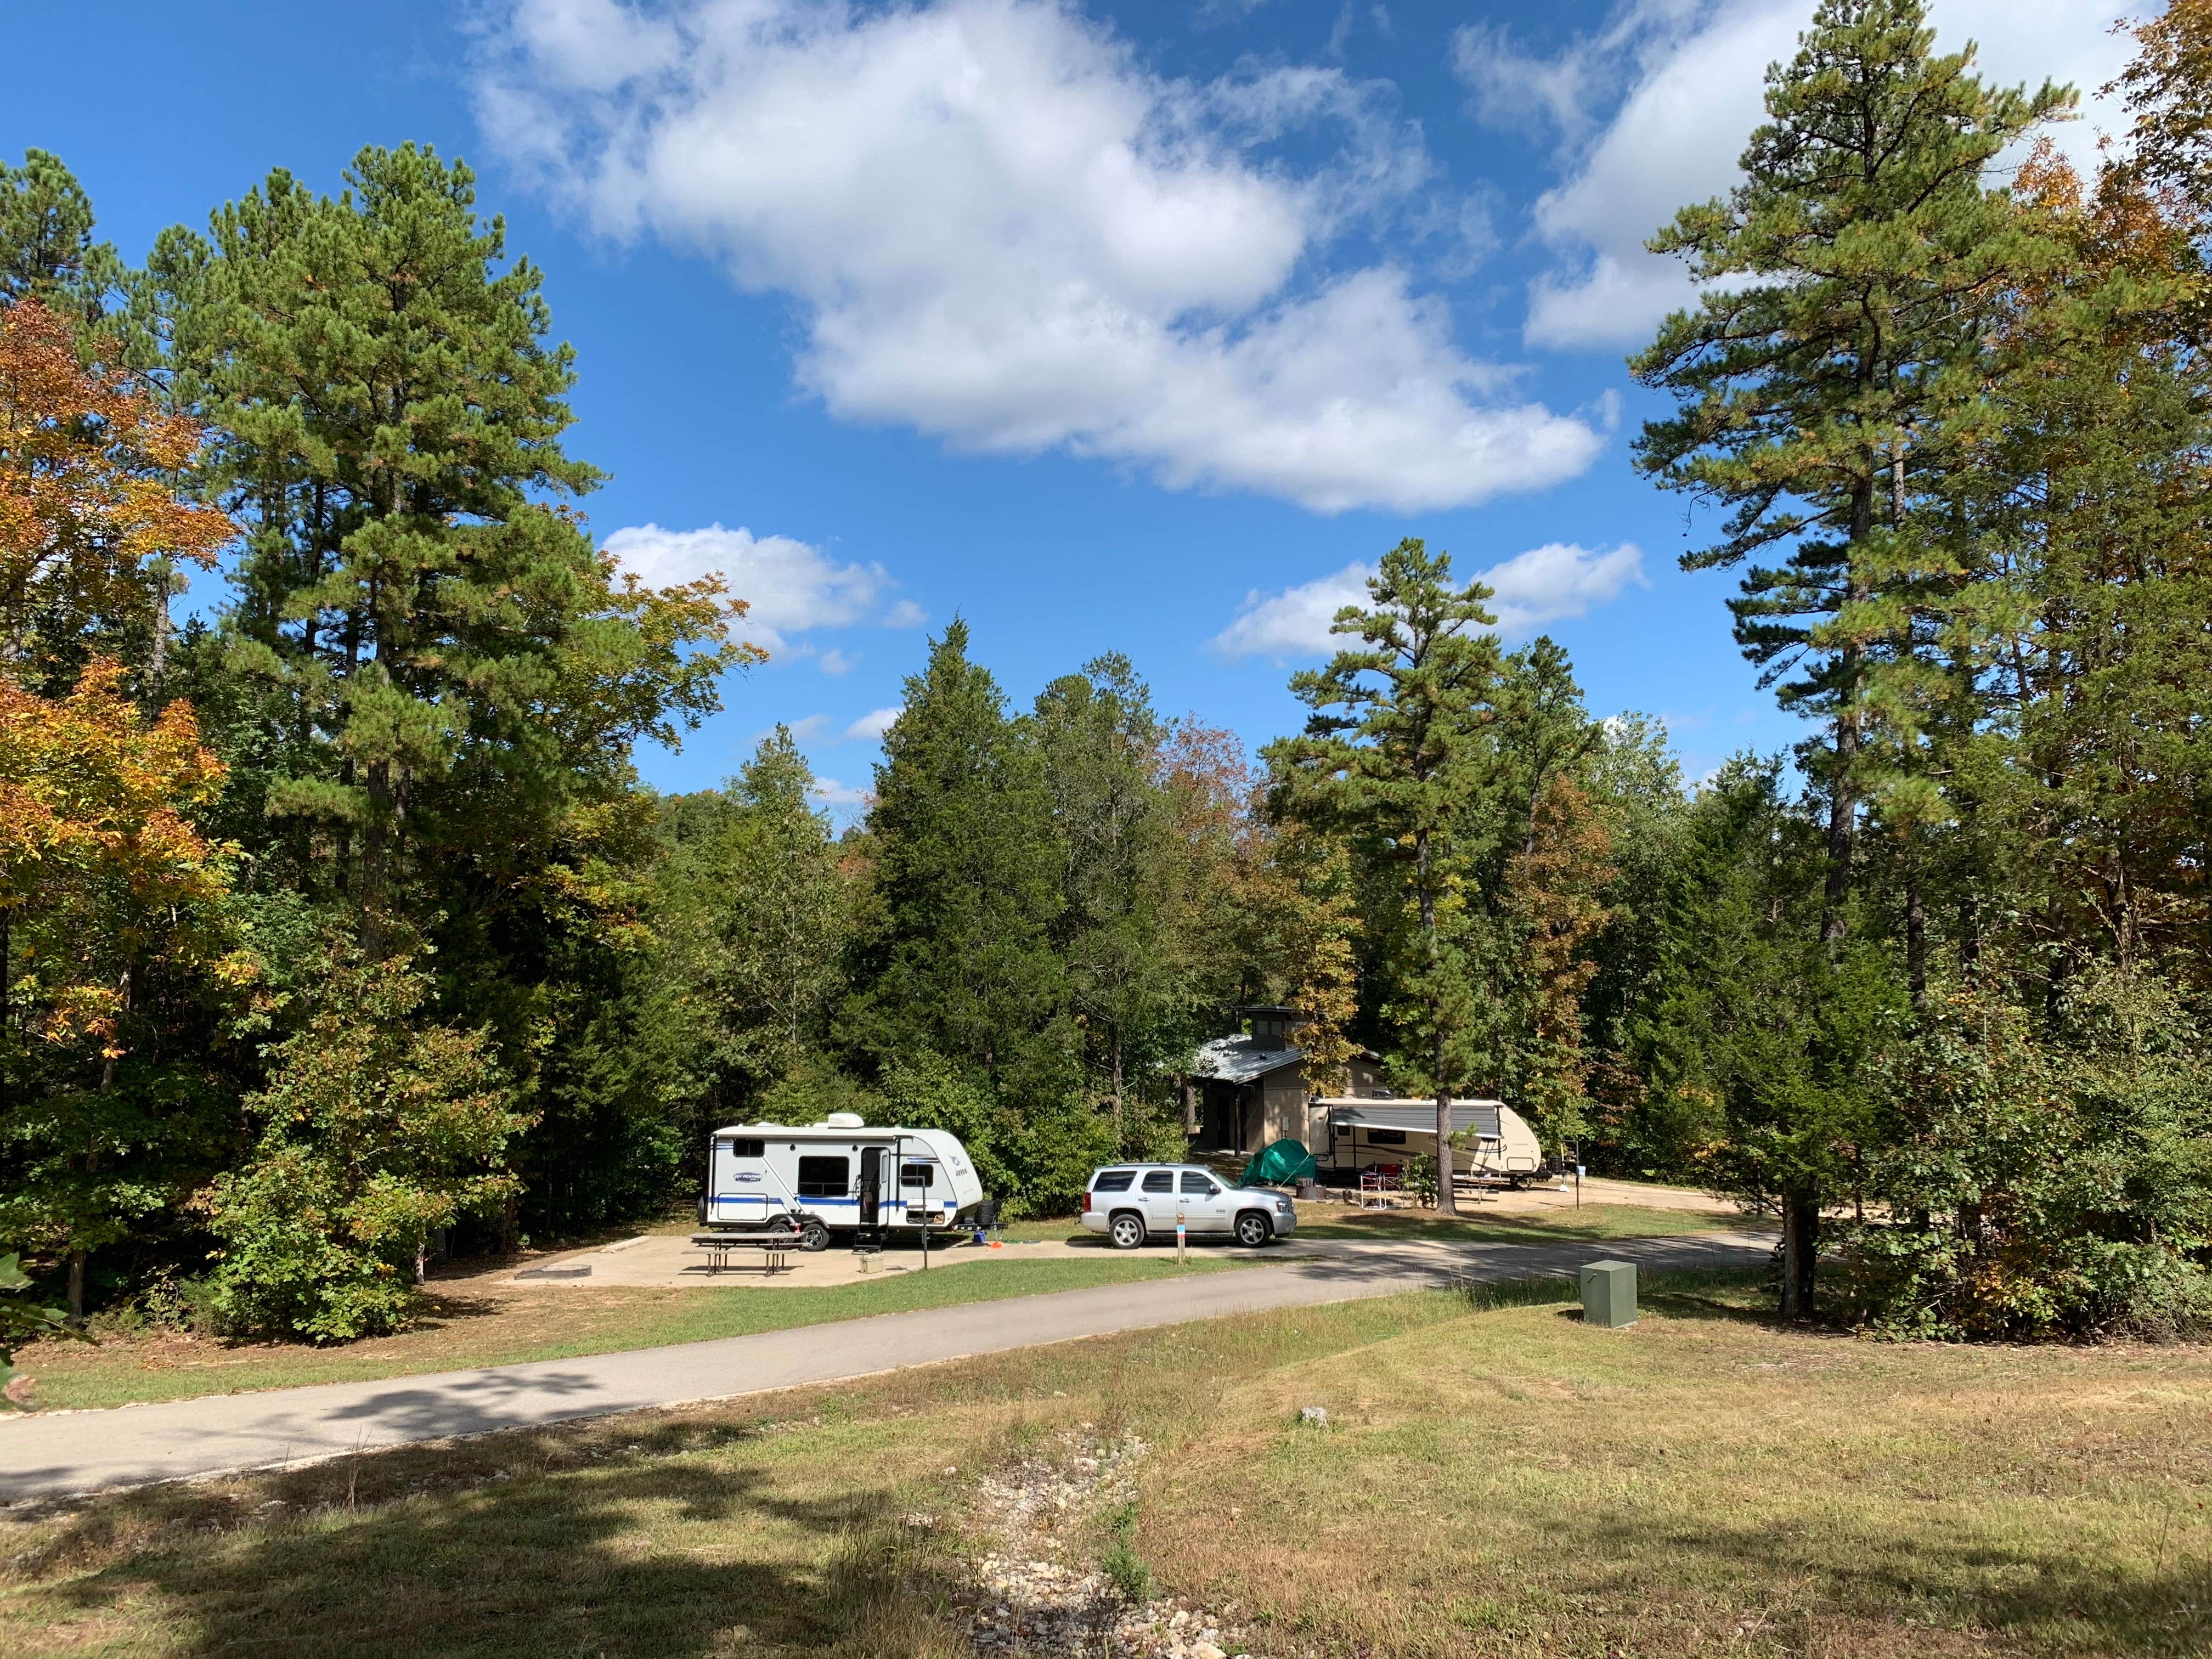 Camper submitted image from Johnson's Shut-Ins State Park - 1